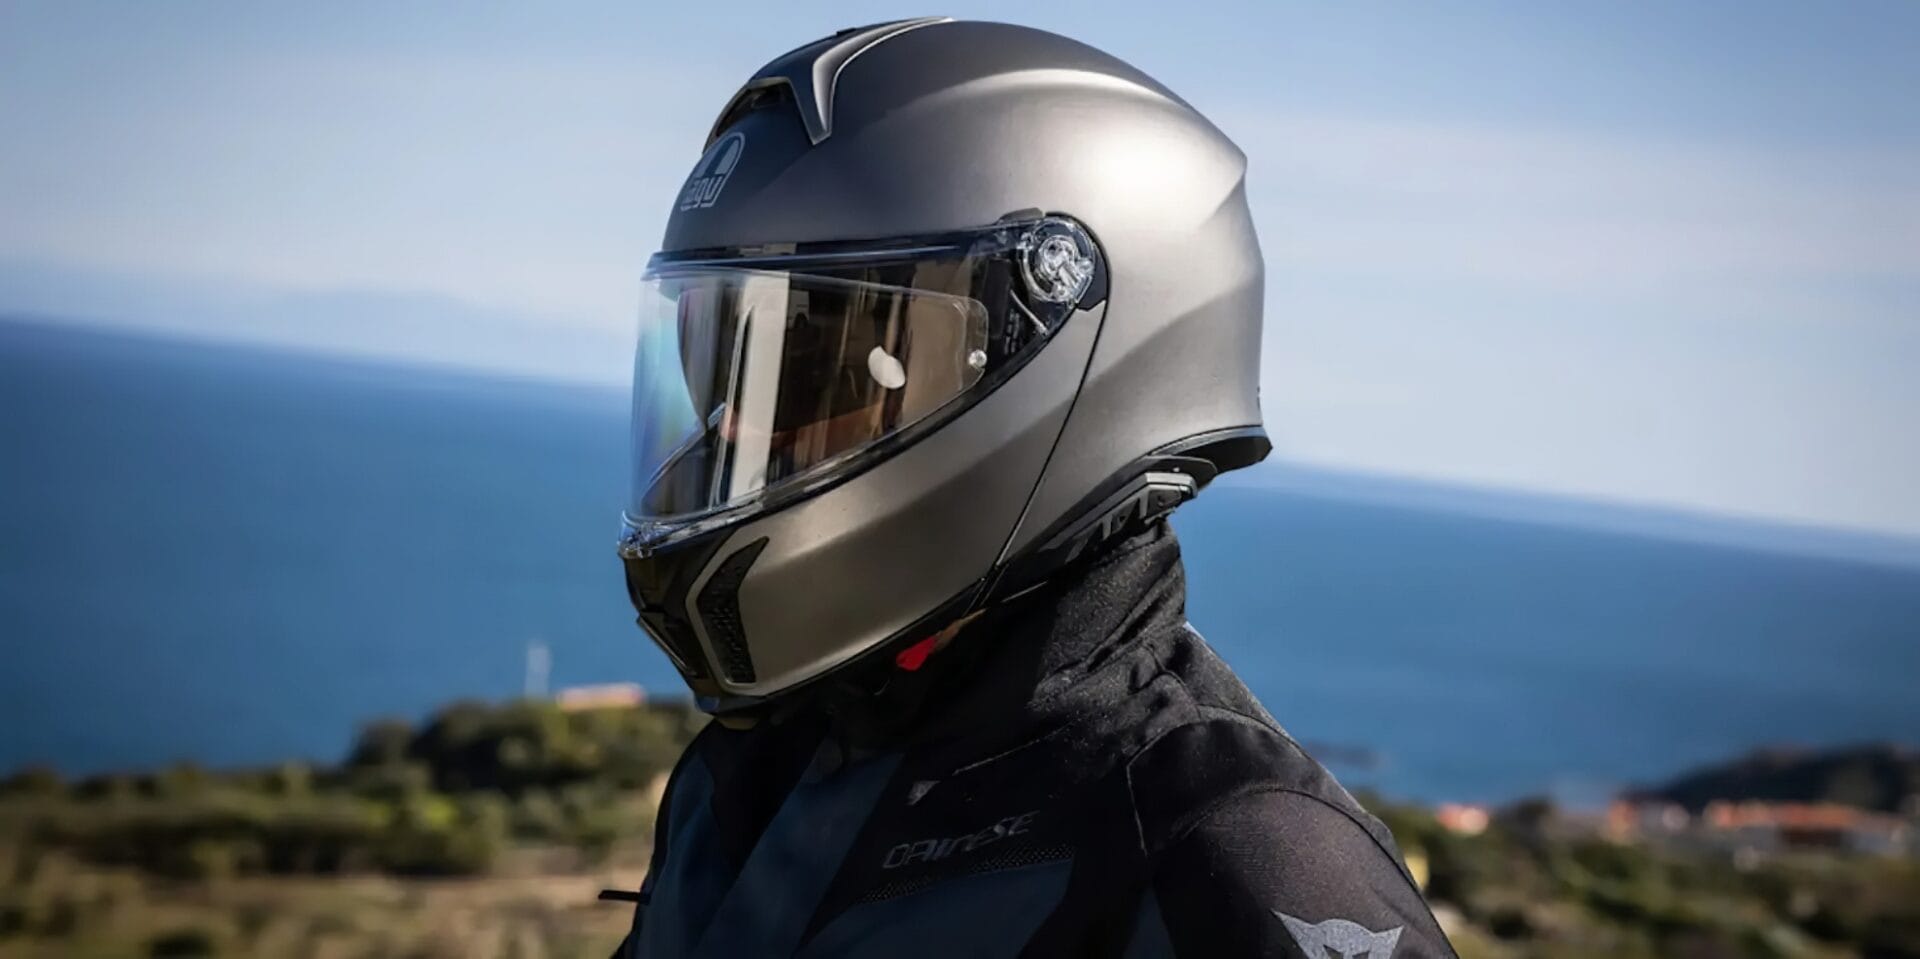 Recall action for AGV Tourmodular helmets: Important information for bikers